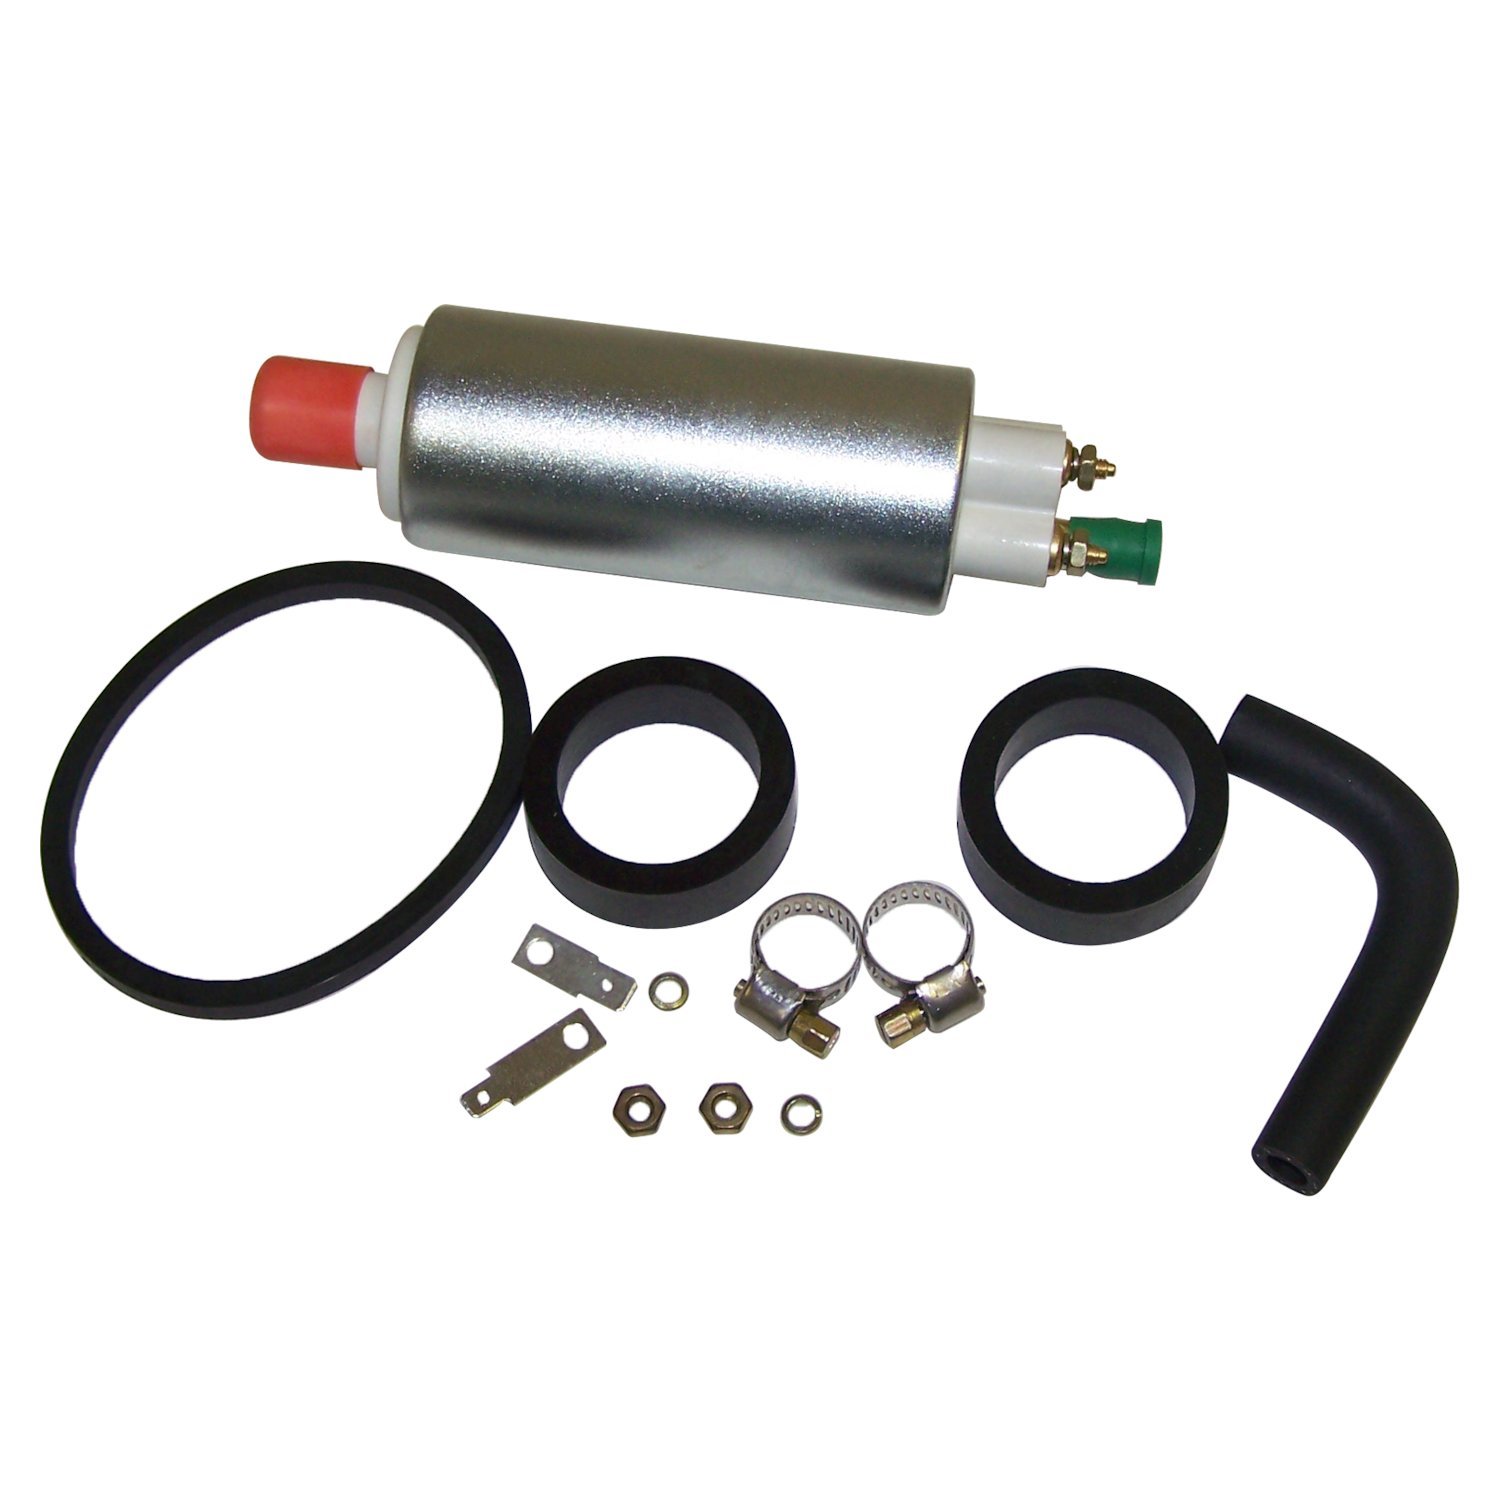 Fuel Pump for Various Jeep Vehicles. Includes Pump, Gaskets, Seals, & Clamps